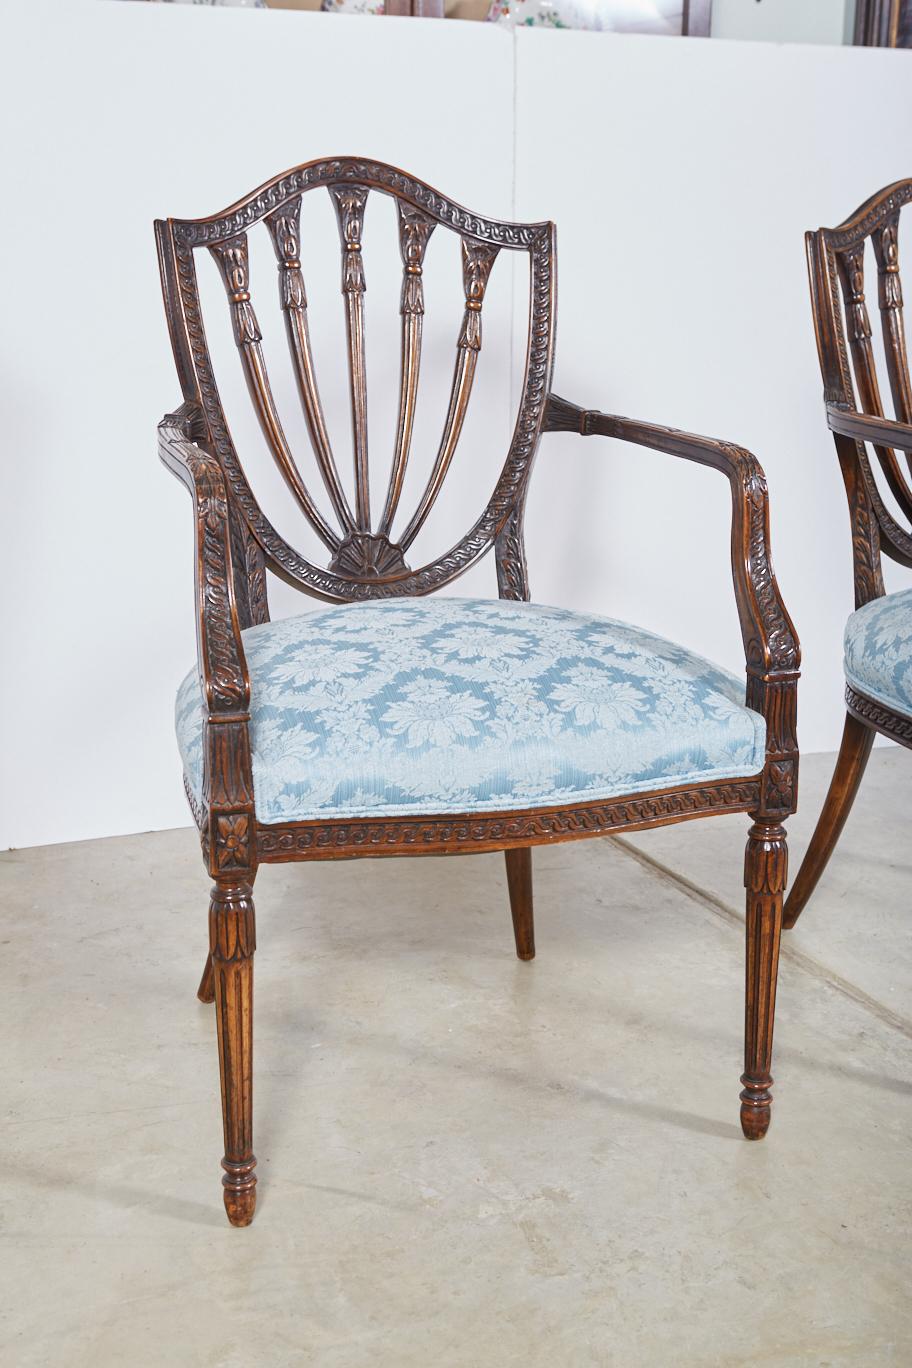 Pair of late 19th century Hepplewhite style armchairs in the French taste. Beautiful mahogany frames incorporating numerous classical motifs including bundled reeds, paterae, guilloche carving on the arms and surrounding the shield back, and fluted